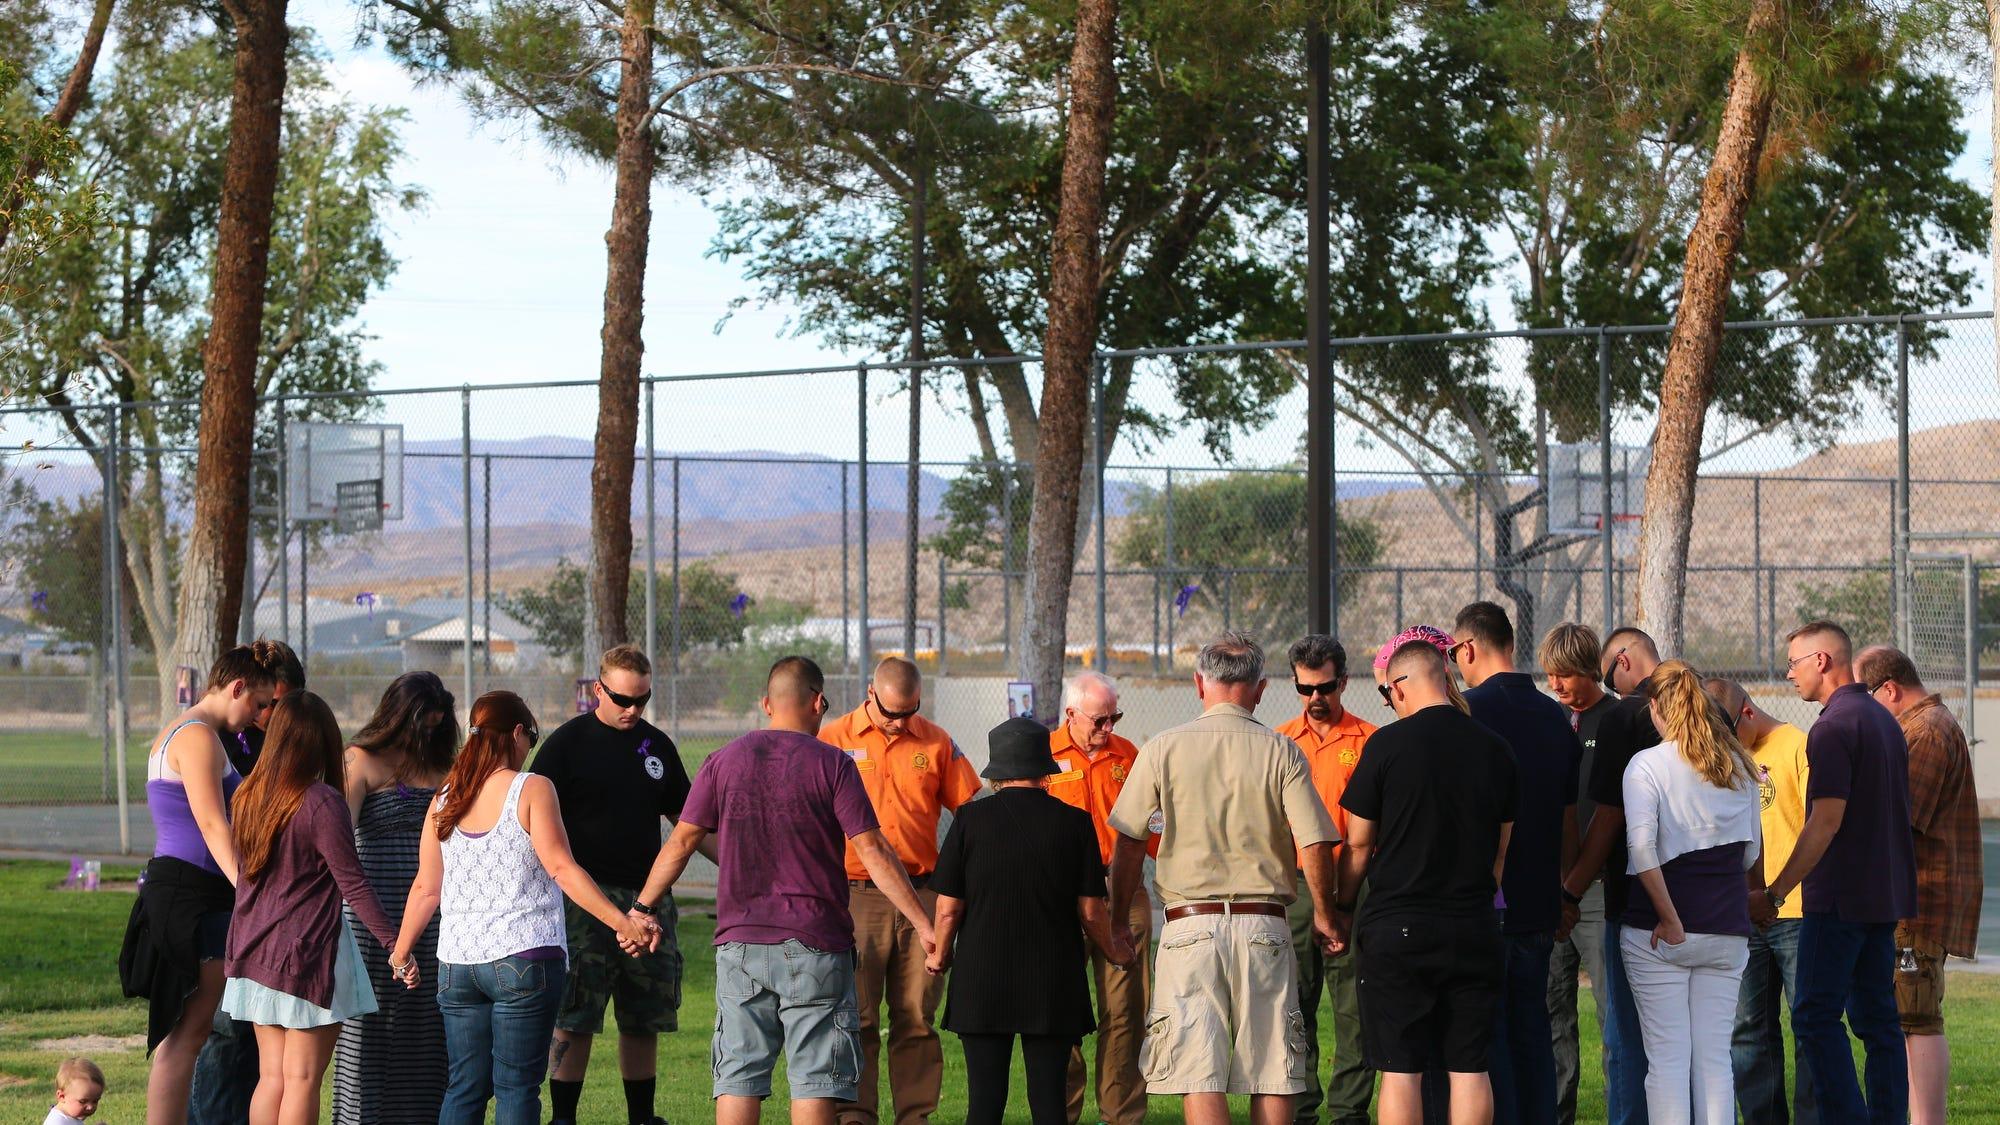 Family, friends, fellow Marines, community members, and search and rescue personnel hold hands in a circle as a prayer is said during a vigil in memory of Erin Corwin at Luckie Park in Twentynine Palms on Monday.